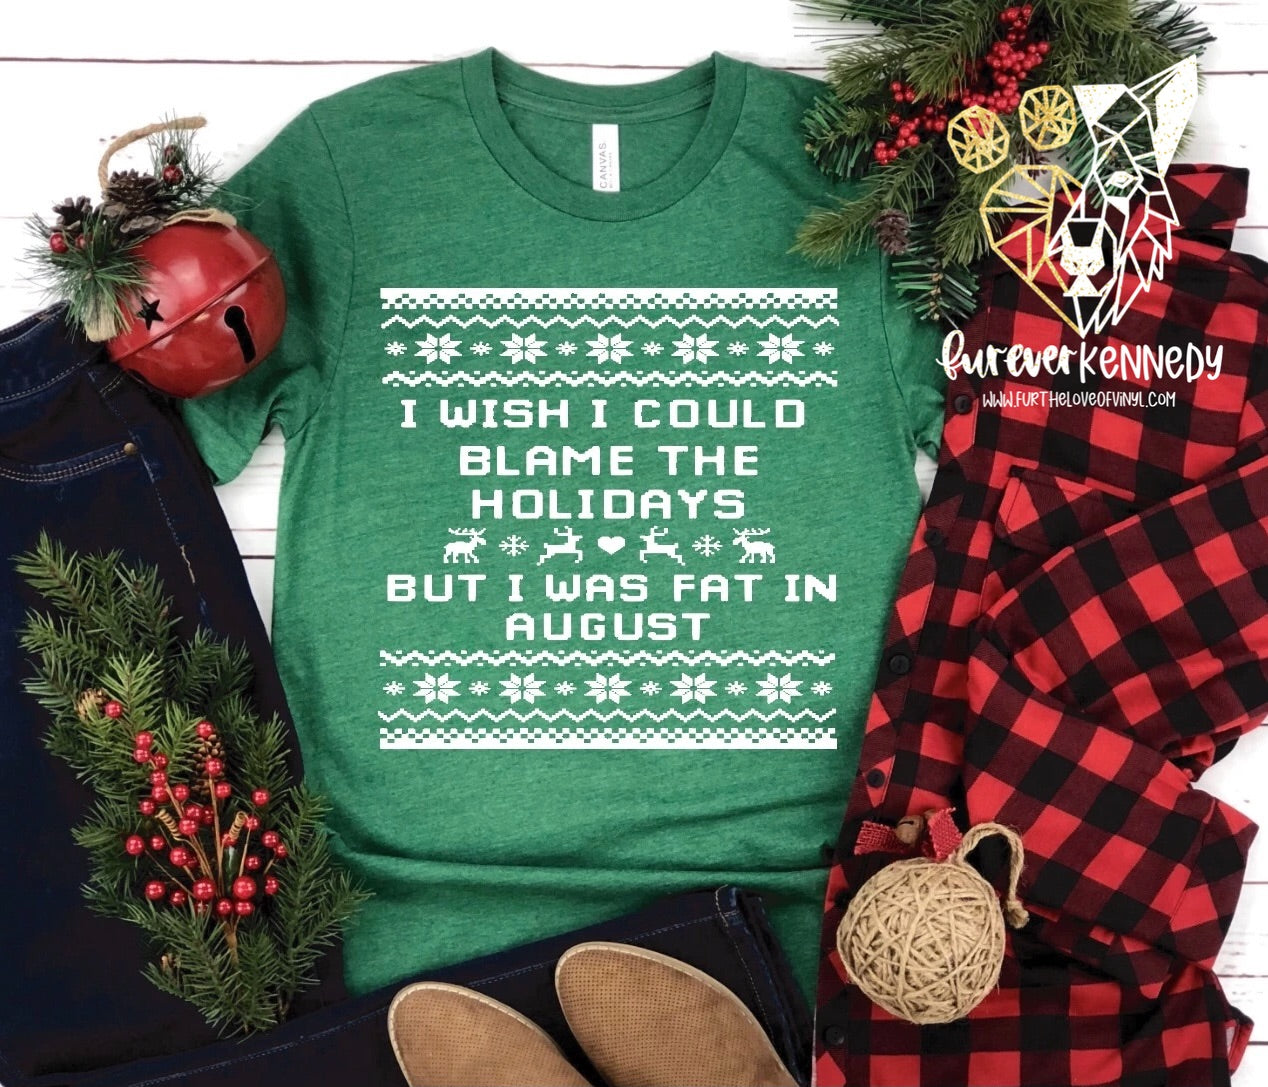 (MTO) Apparel: I wish I could blame the holidays